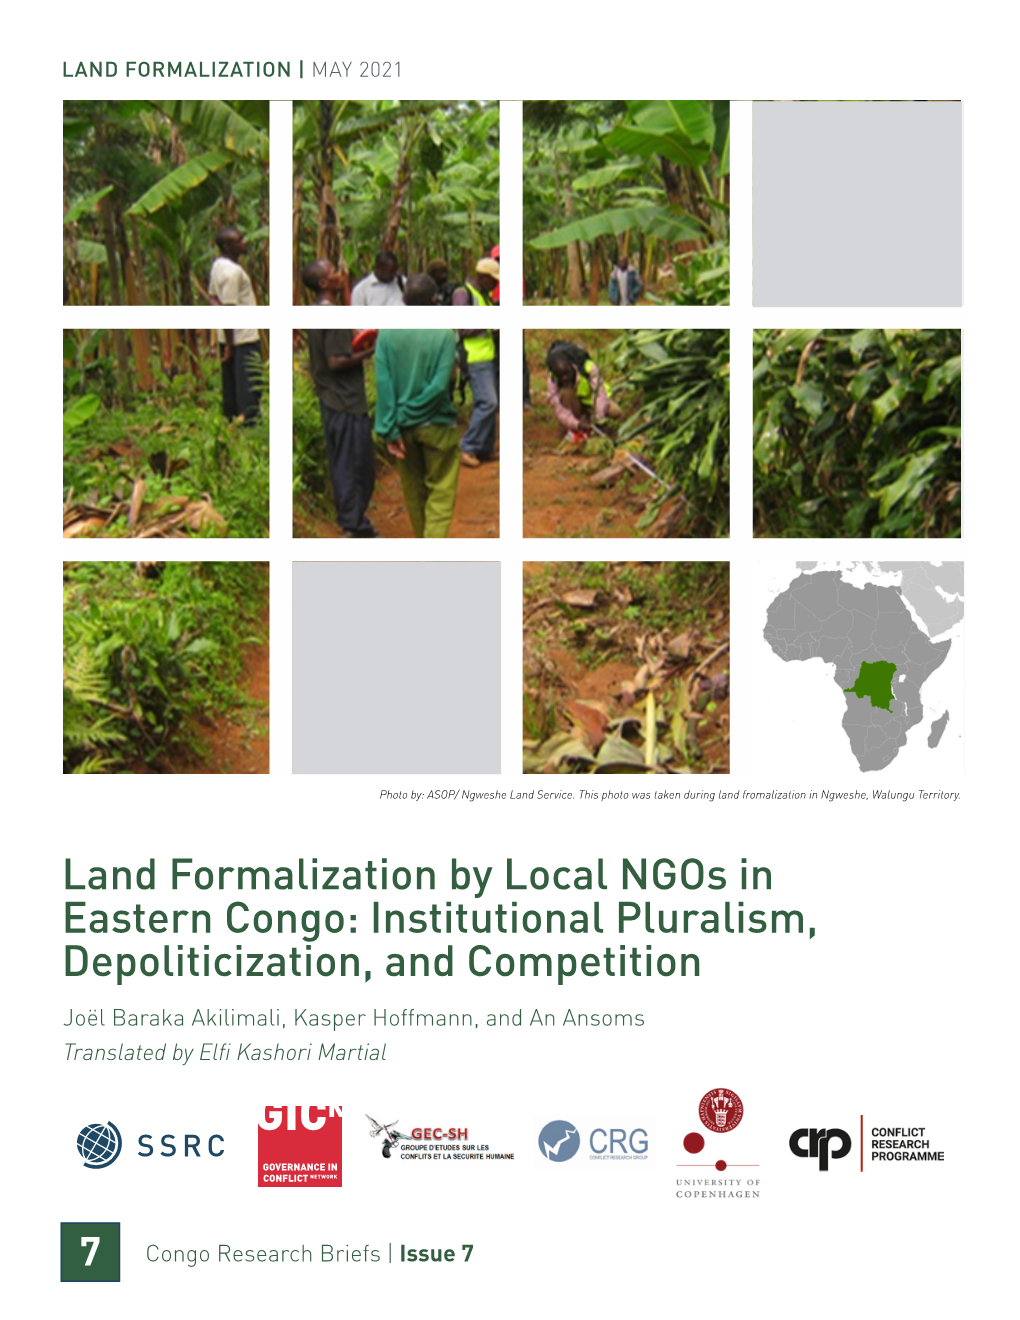 Land Formalization by Local Ngos in Eastern Congo